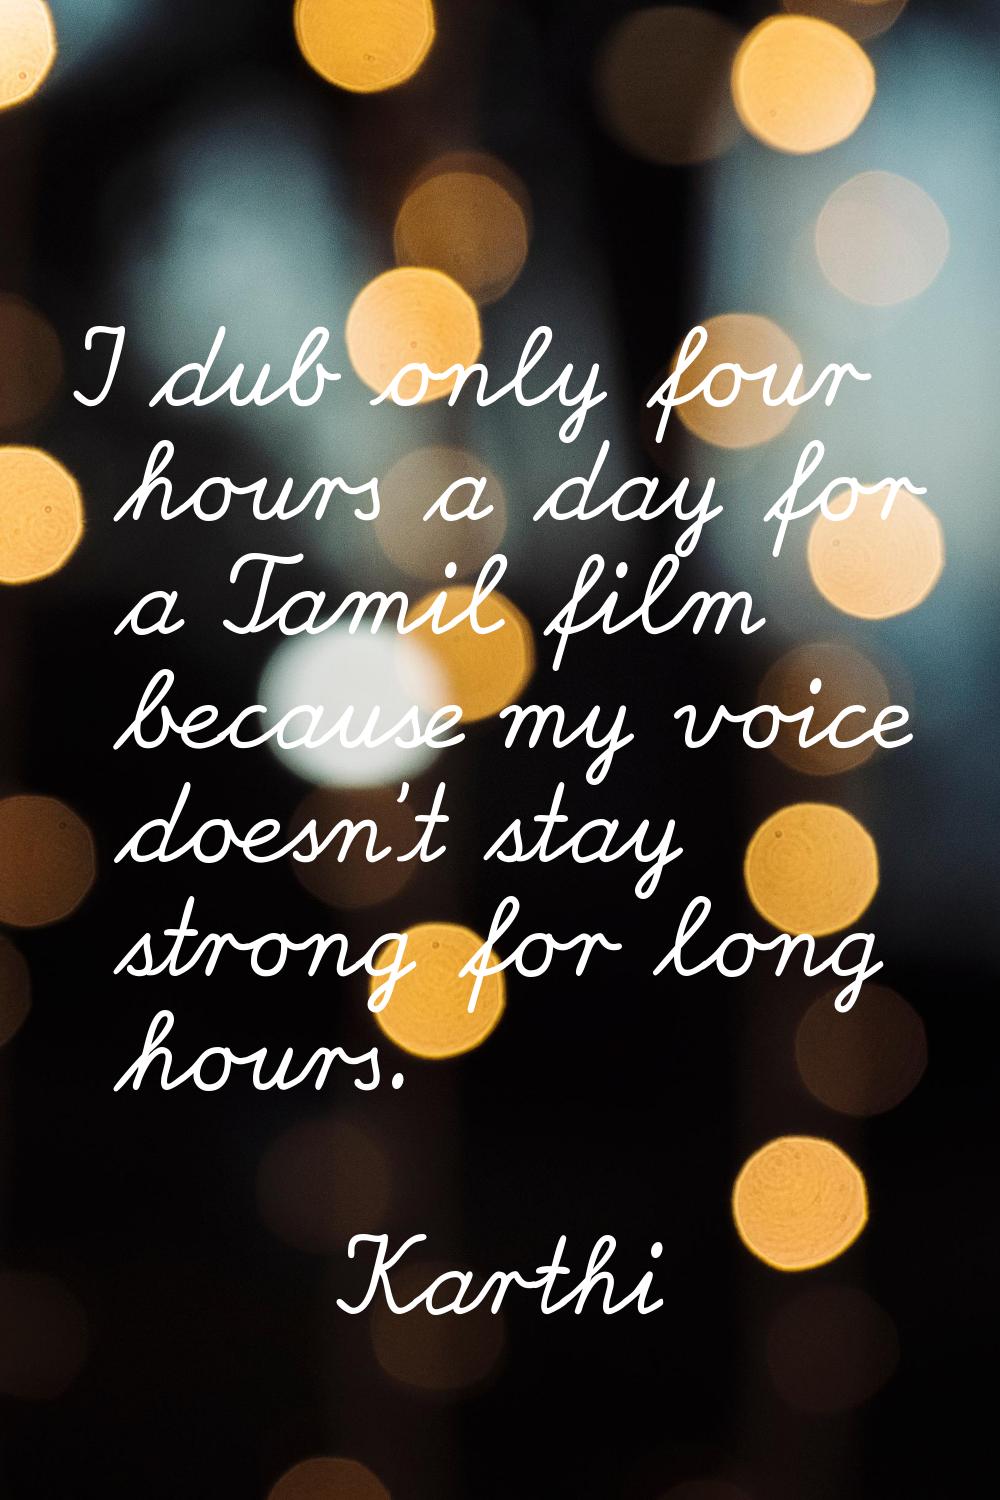 I dub only four hours a day for a Tamil film because my voice doesn't stay strong for long hours.